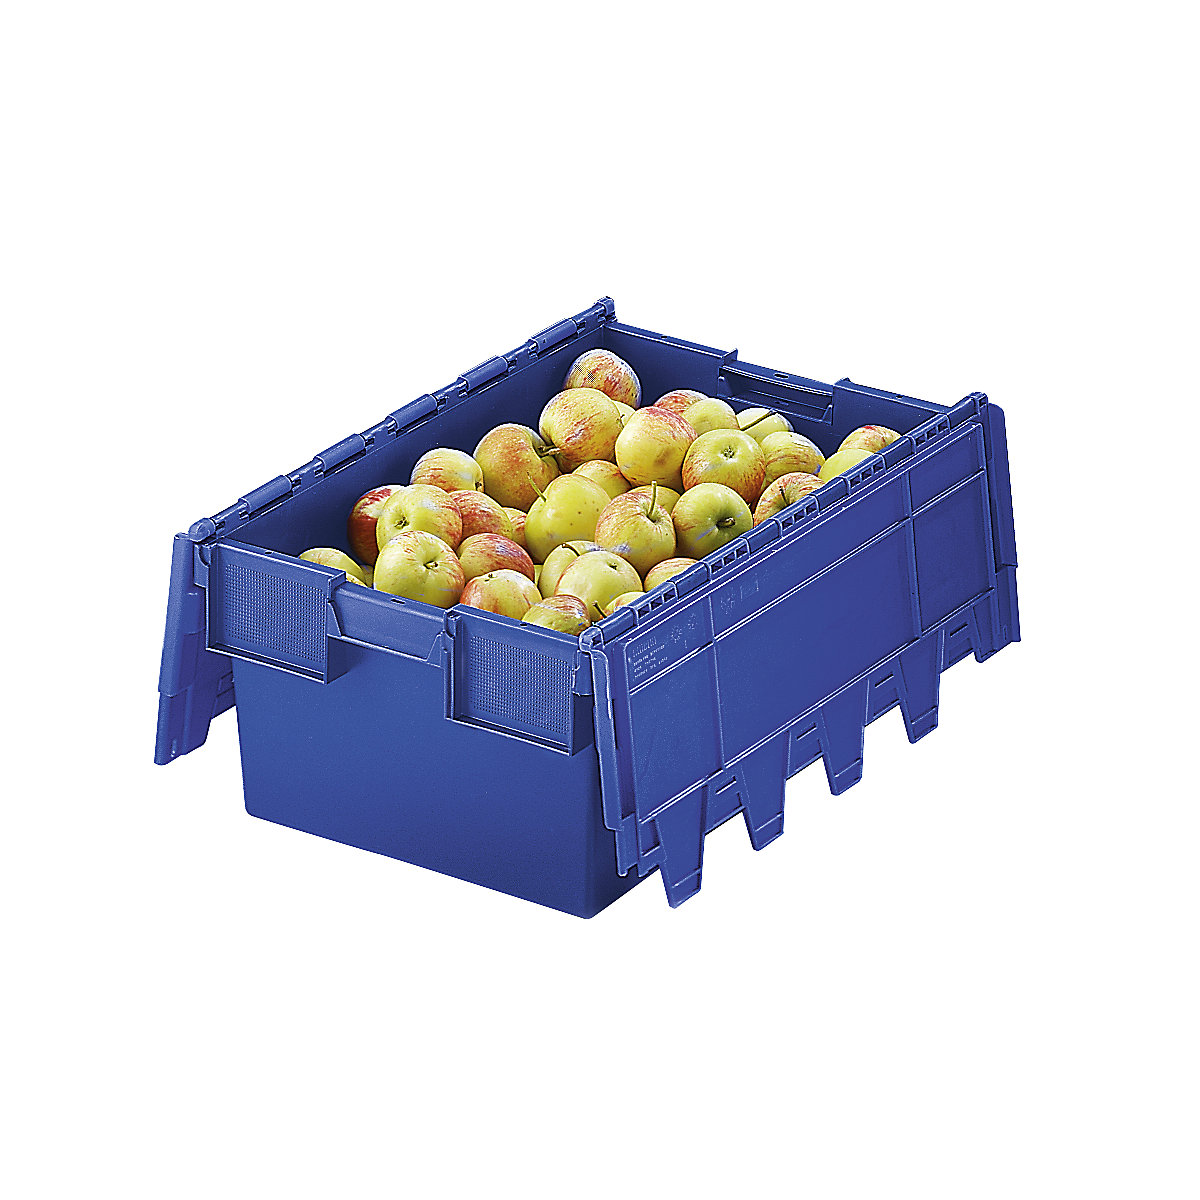 Reusable stacking containers with folding lids, capacity 40 litres, LxWxH 600 x 400 x 250 mm, blue